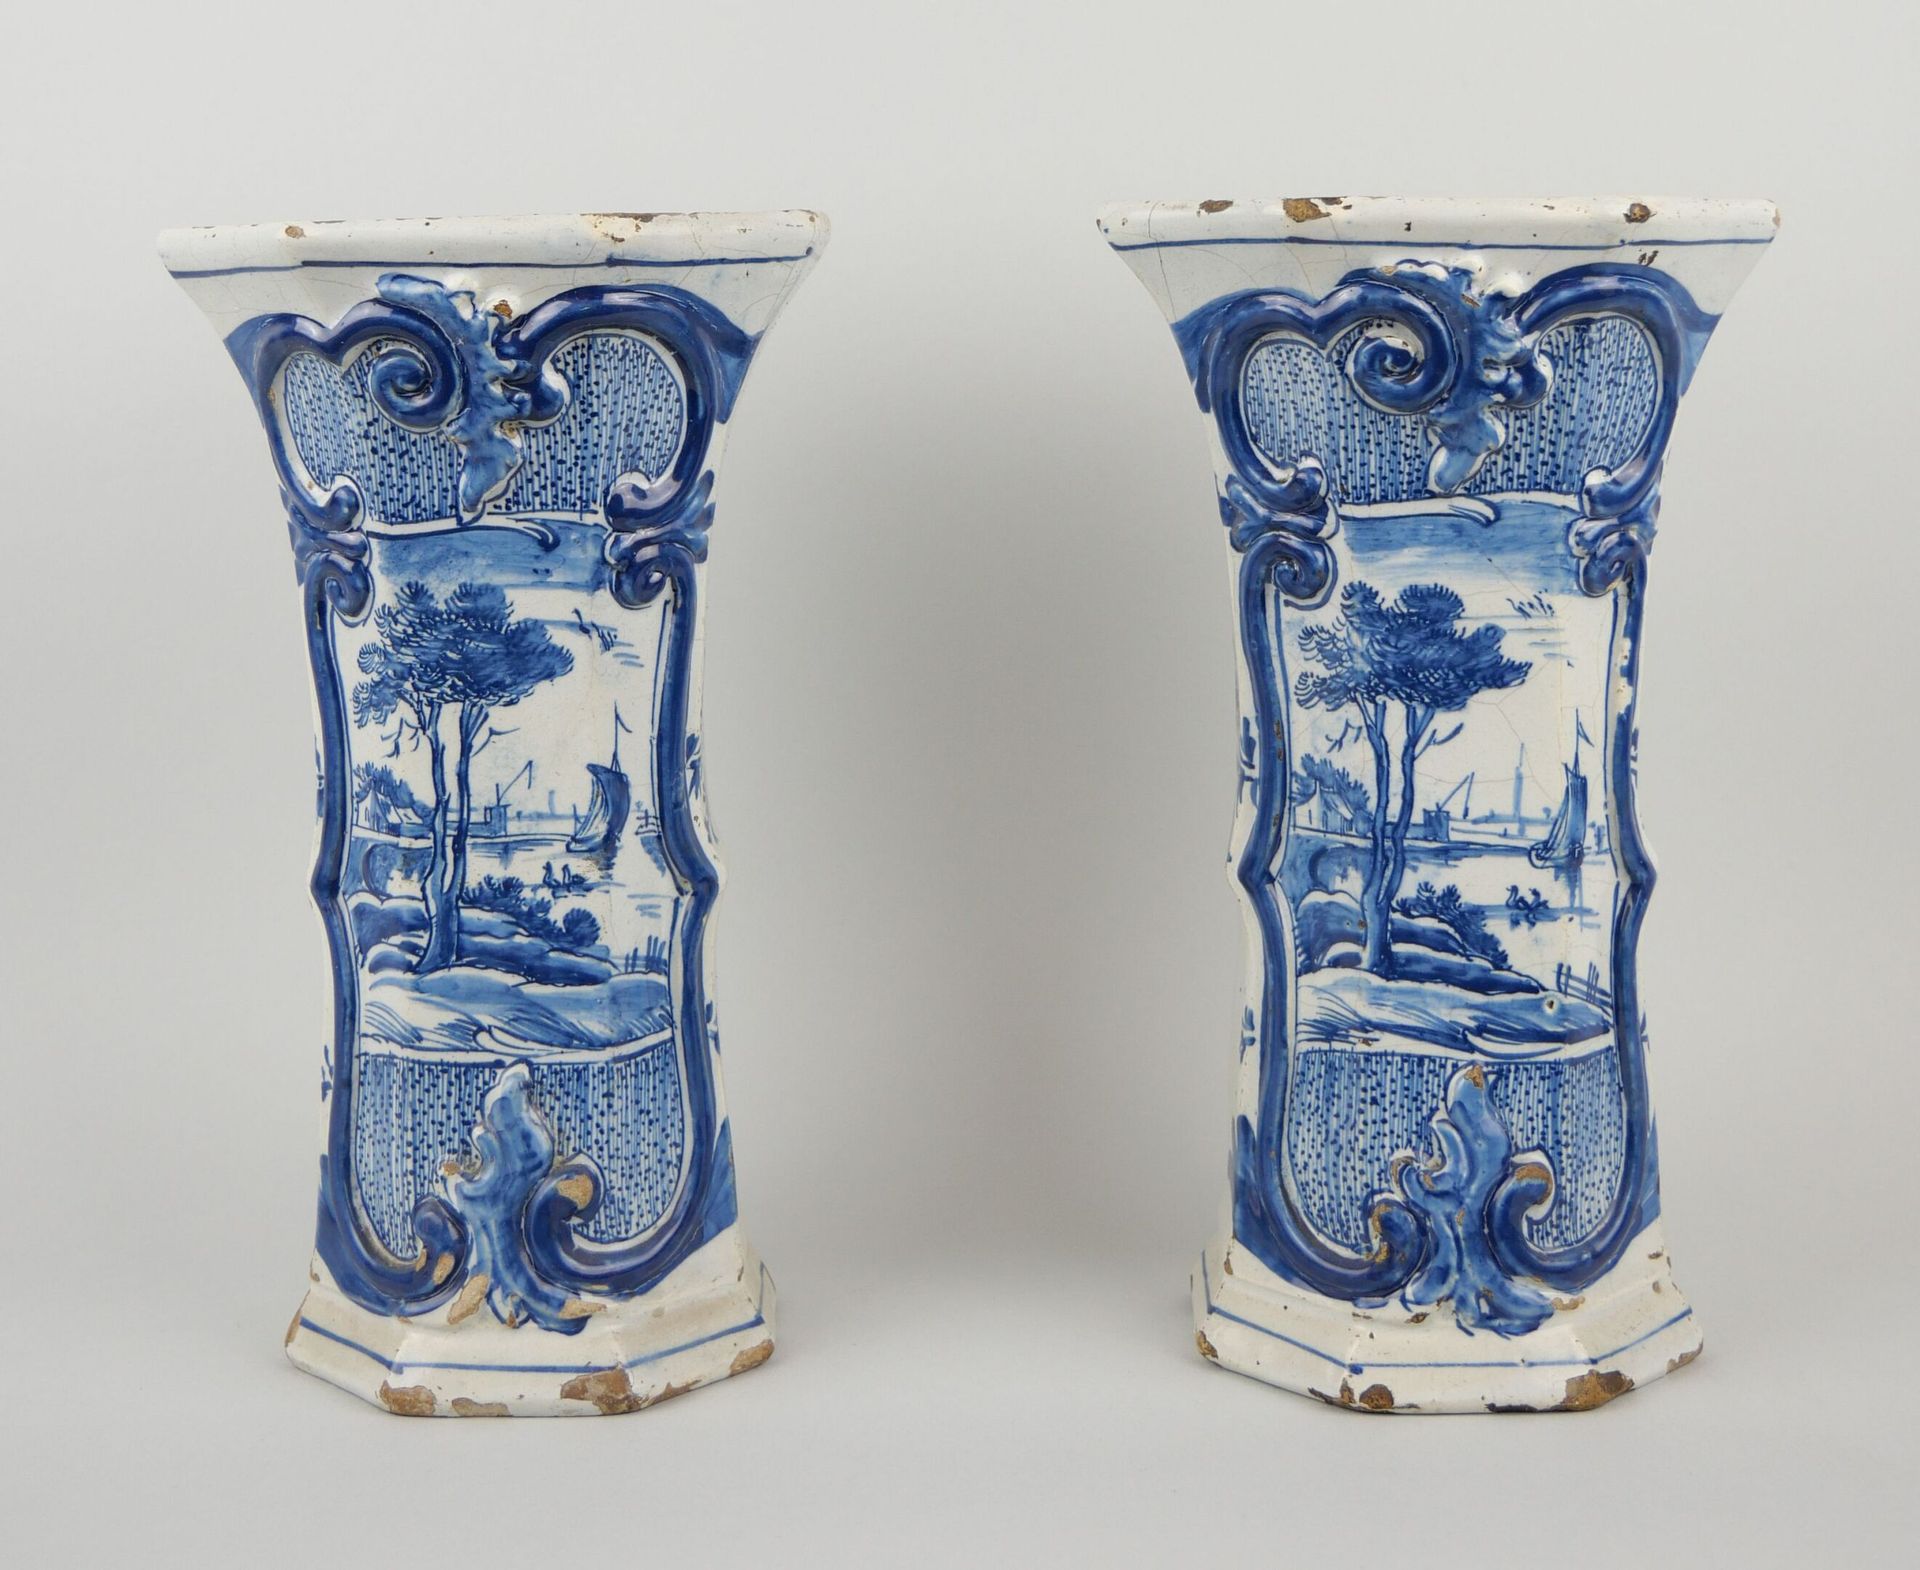 Null DELFT :

Pair of earthenware cone vases with blue monochrome decoration.

P&hellip;